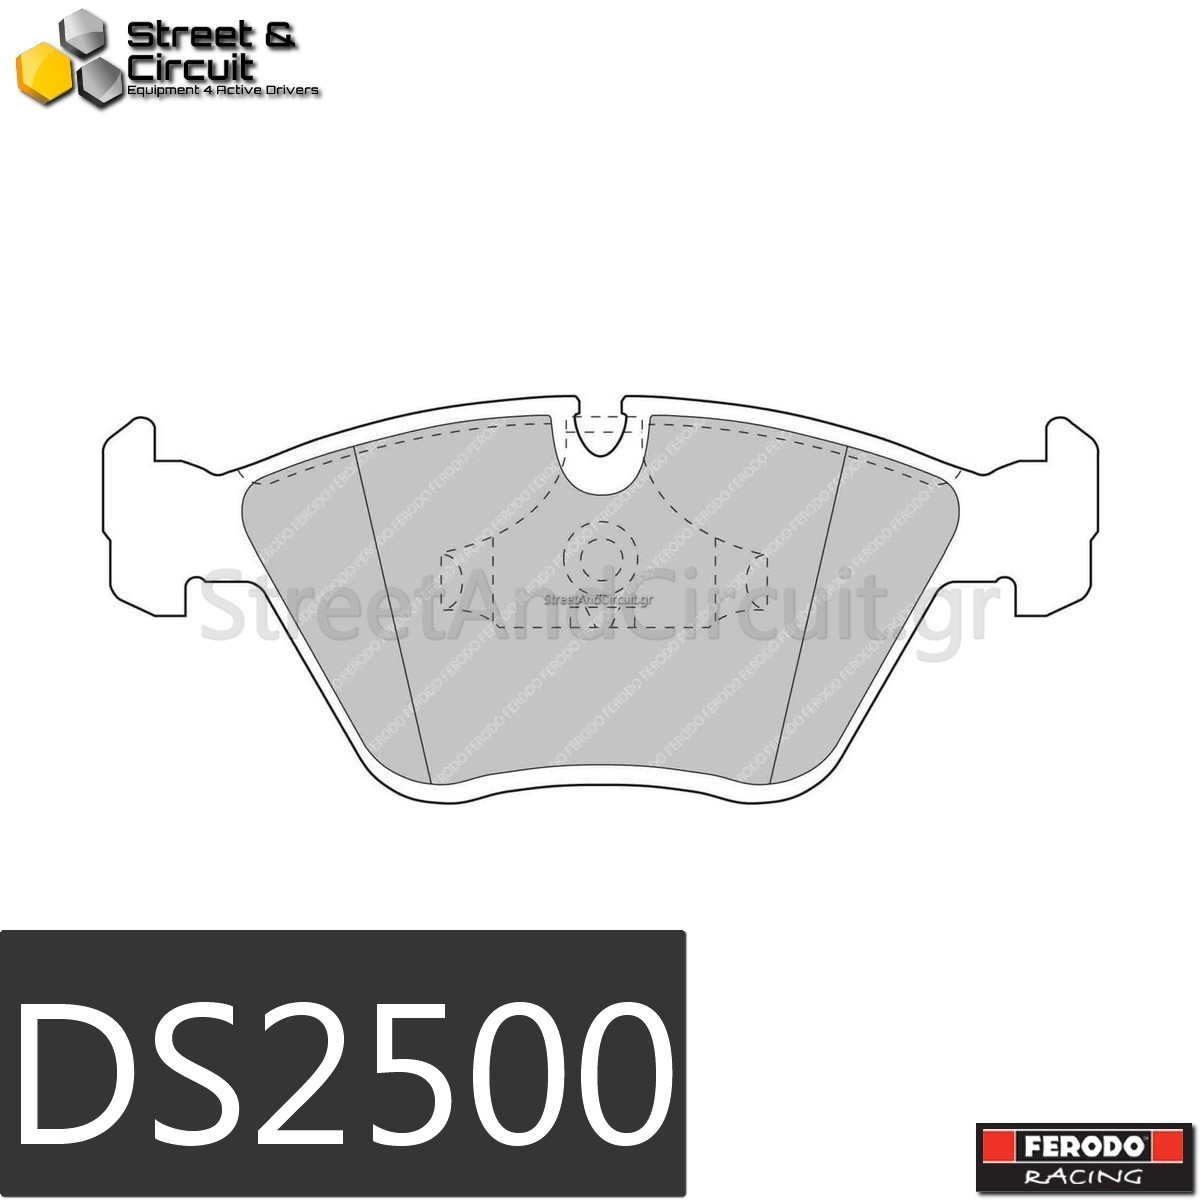 3.5 24V (E34) M5 1988-1995 (FRONT), Brake System: ATE - Ferodo Racing Τακάκια *DS2500*